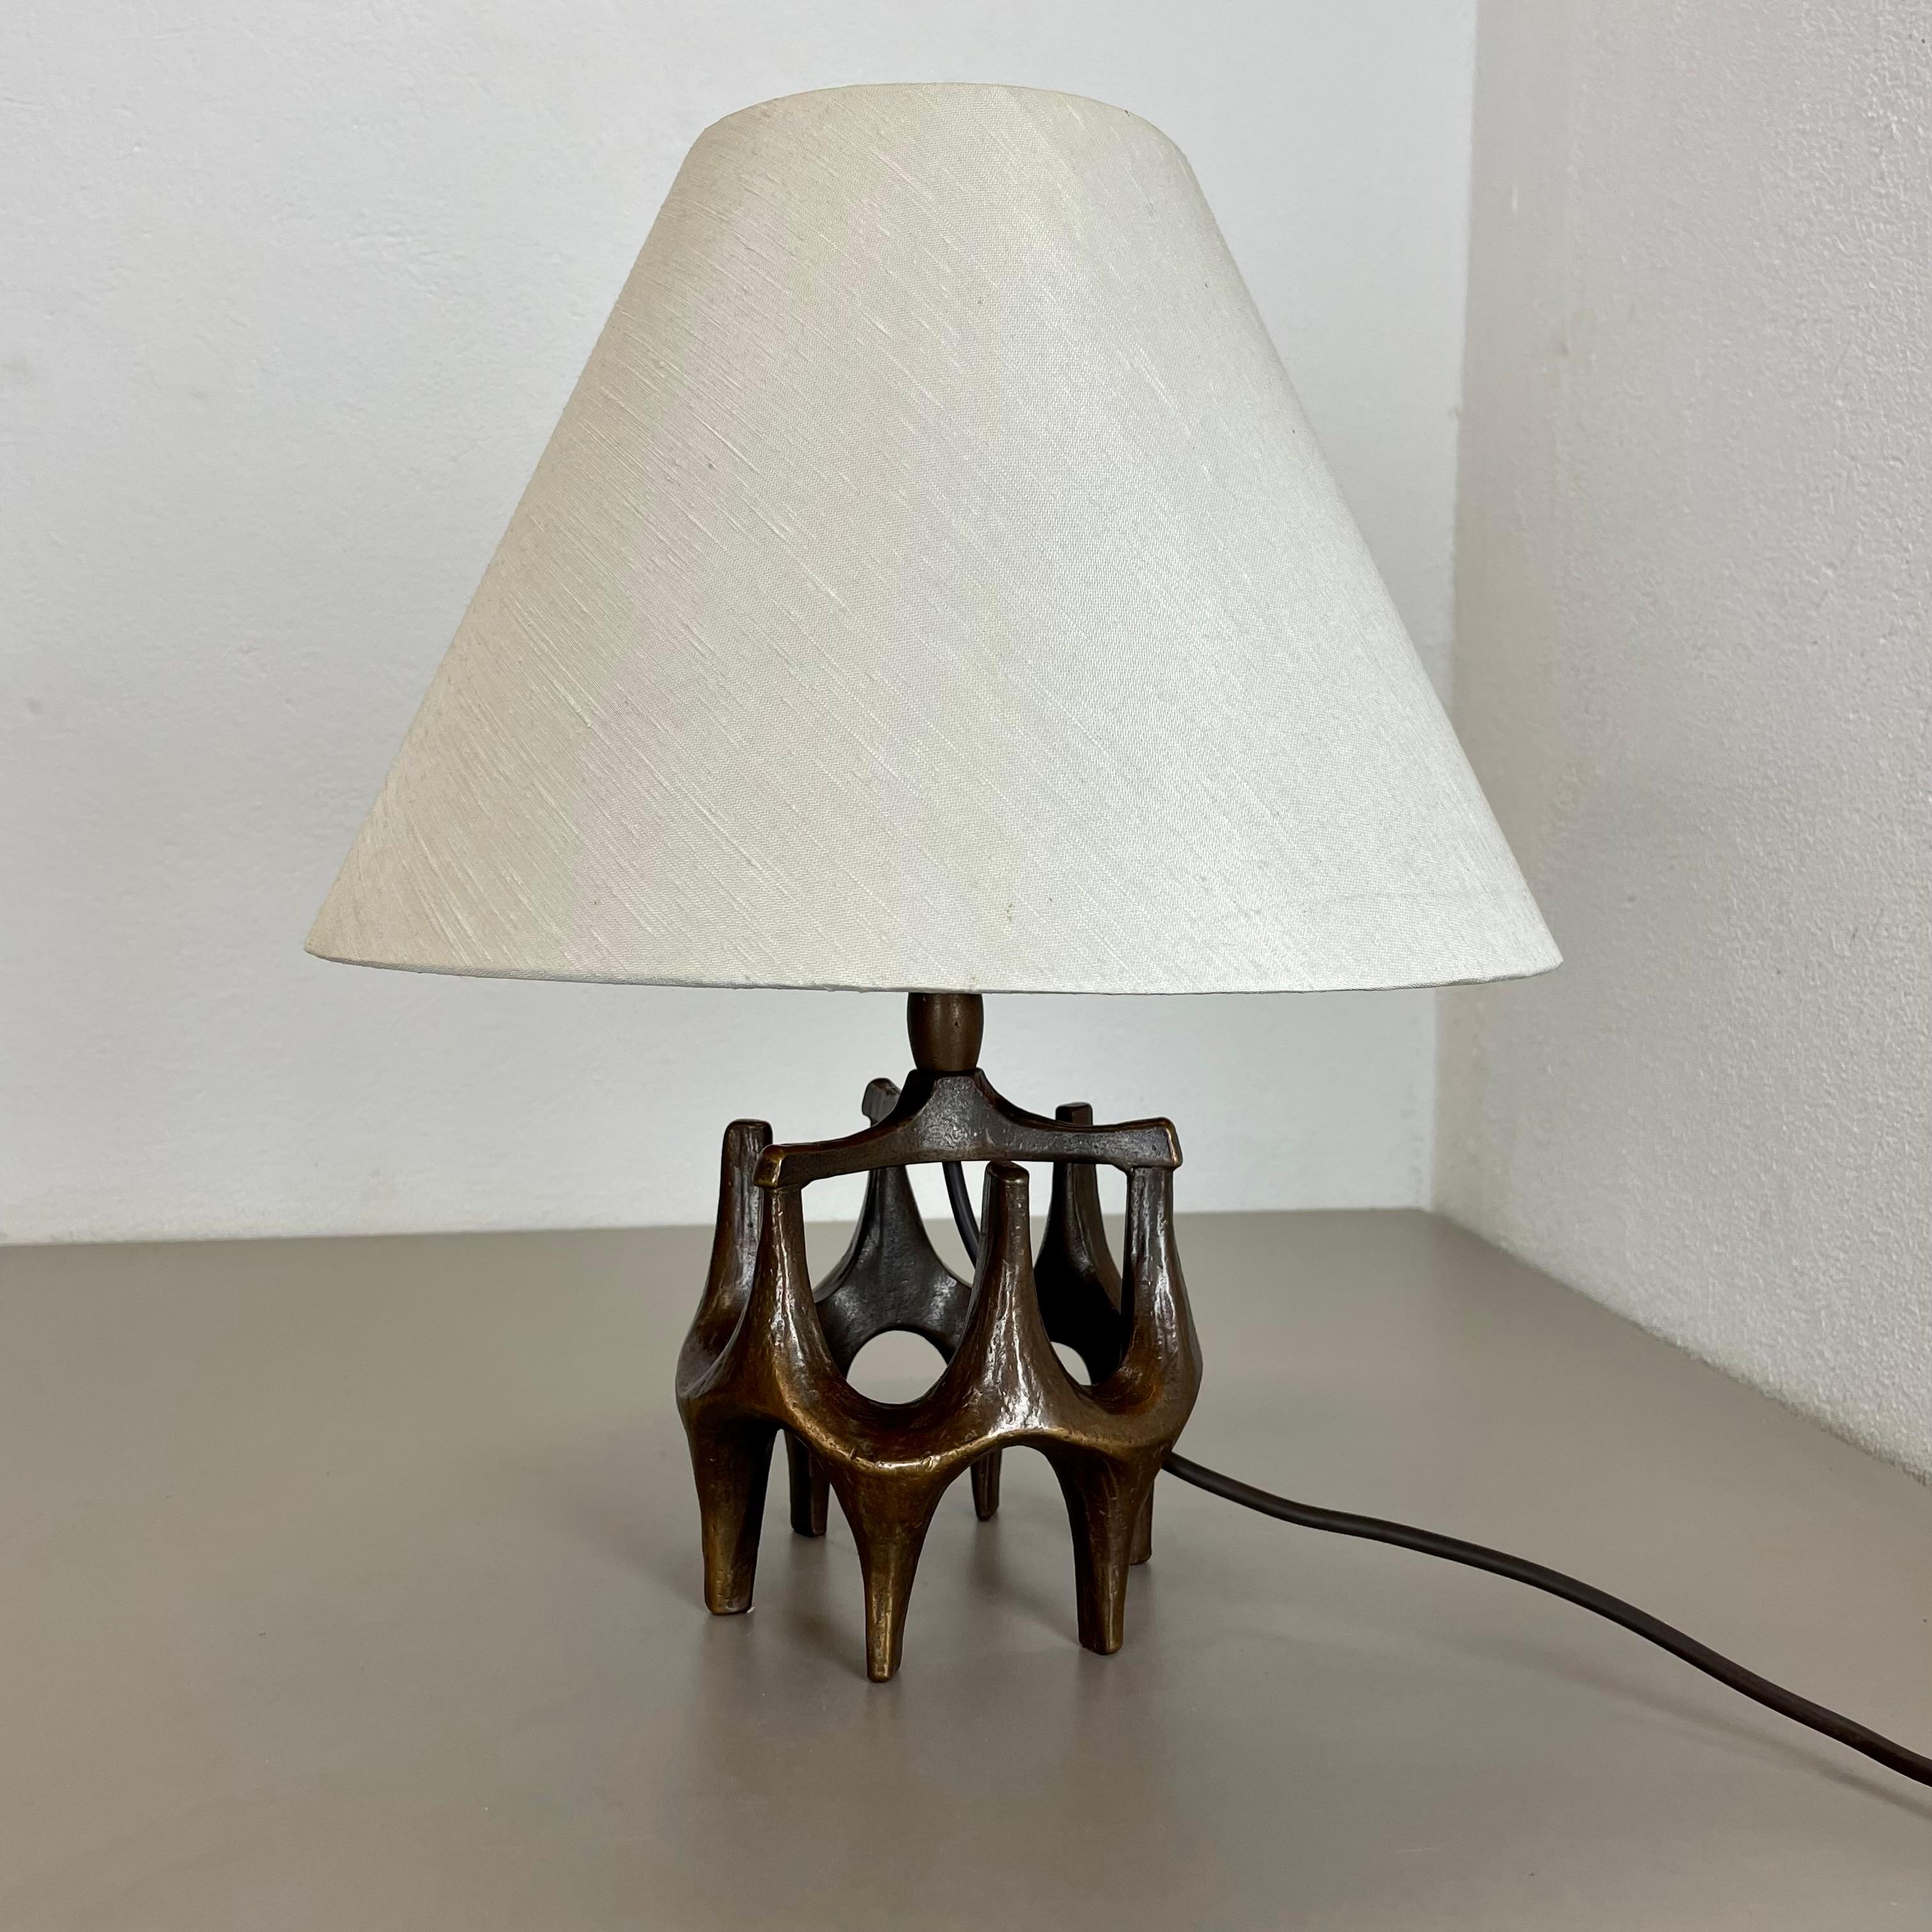 Article: Brutalist table light

Origin: Germany

Design producer: Michael Harjes

Material: bronze

Decade: 1960s

Description: This original vintage table light, was produced in the 1960s in Germany. Designed and executed by Michael Harjes,